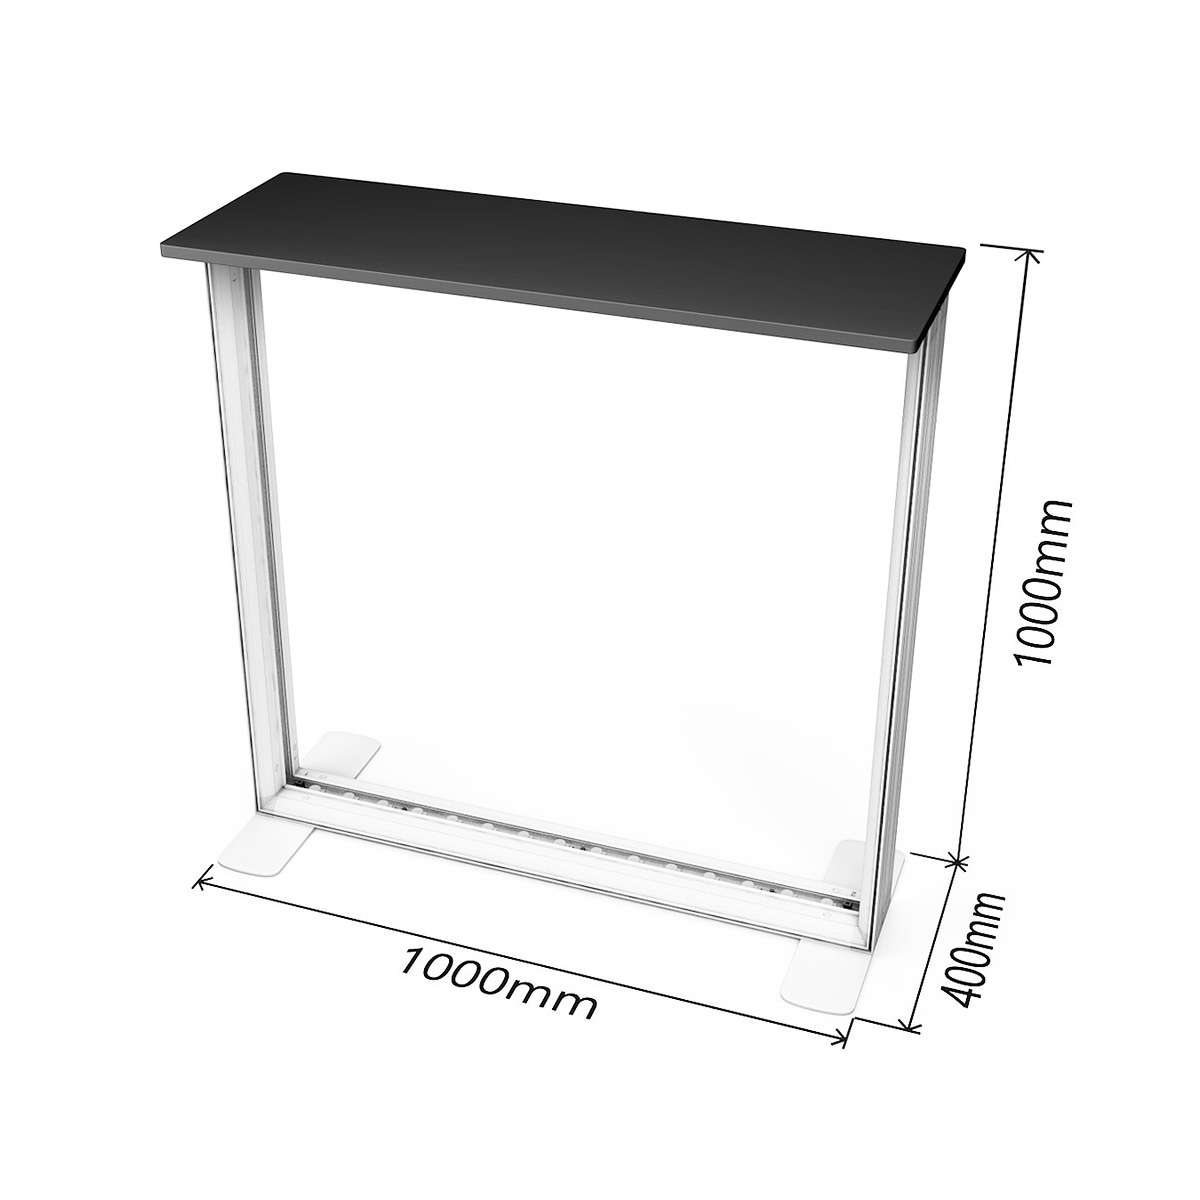 FABRILUX® Exhibition Counter LED Lightbox 1m x 1m Dimensions